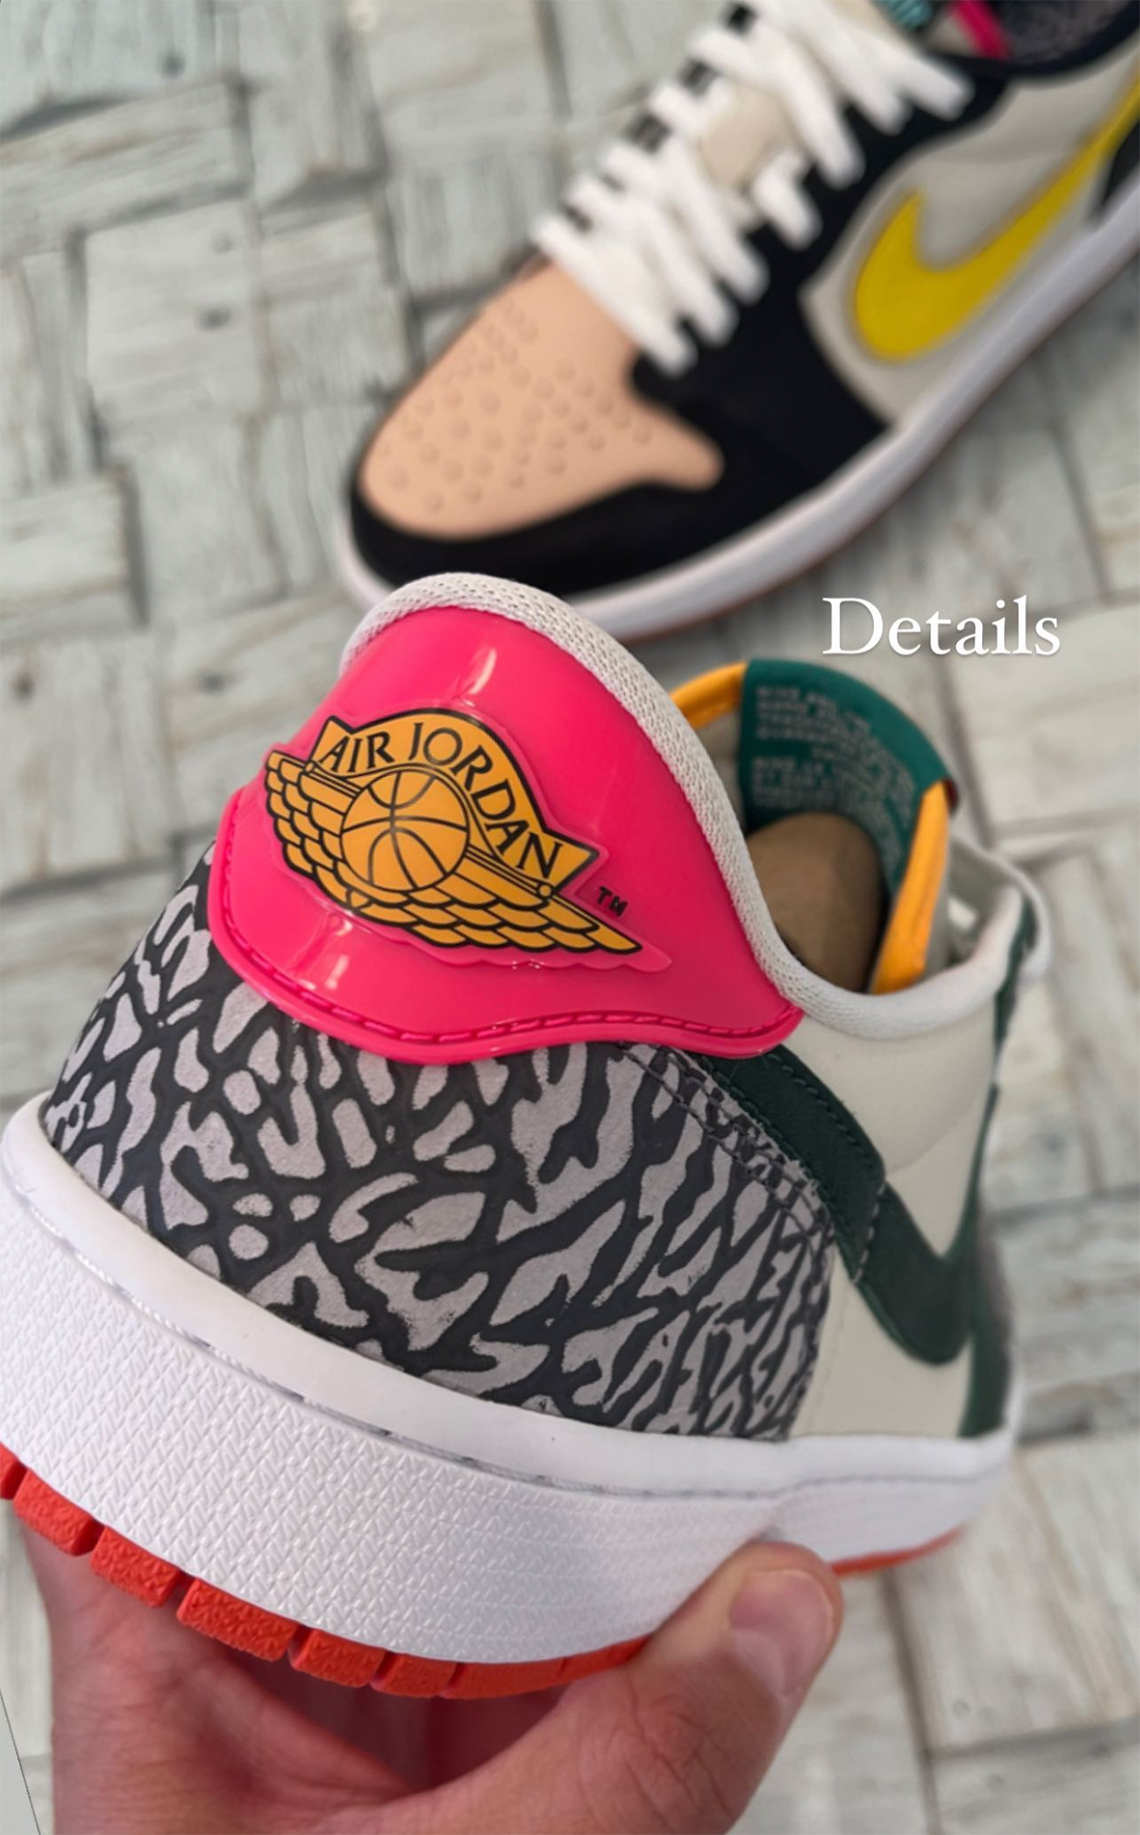 The Air Jordan 1 Mid "Light Iron Ore" Could Be the Cutest Colourway Yet Black Canvas Black Light Steel Grey-White-Fire Red DH7138-006 For Sale quantity Og What The Solefly 4